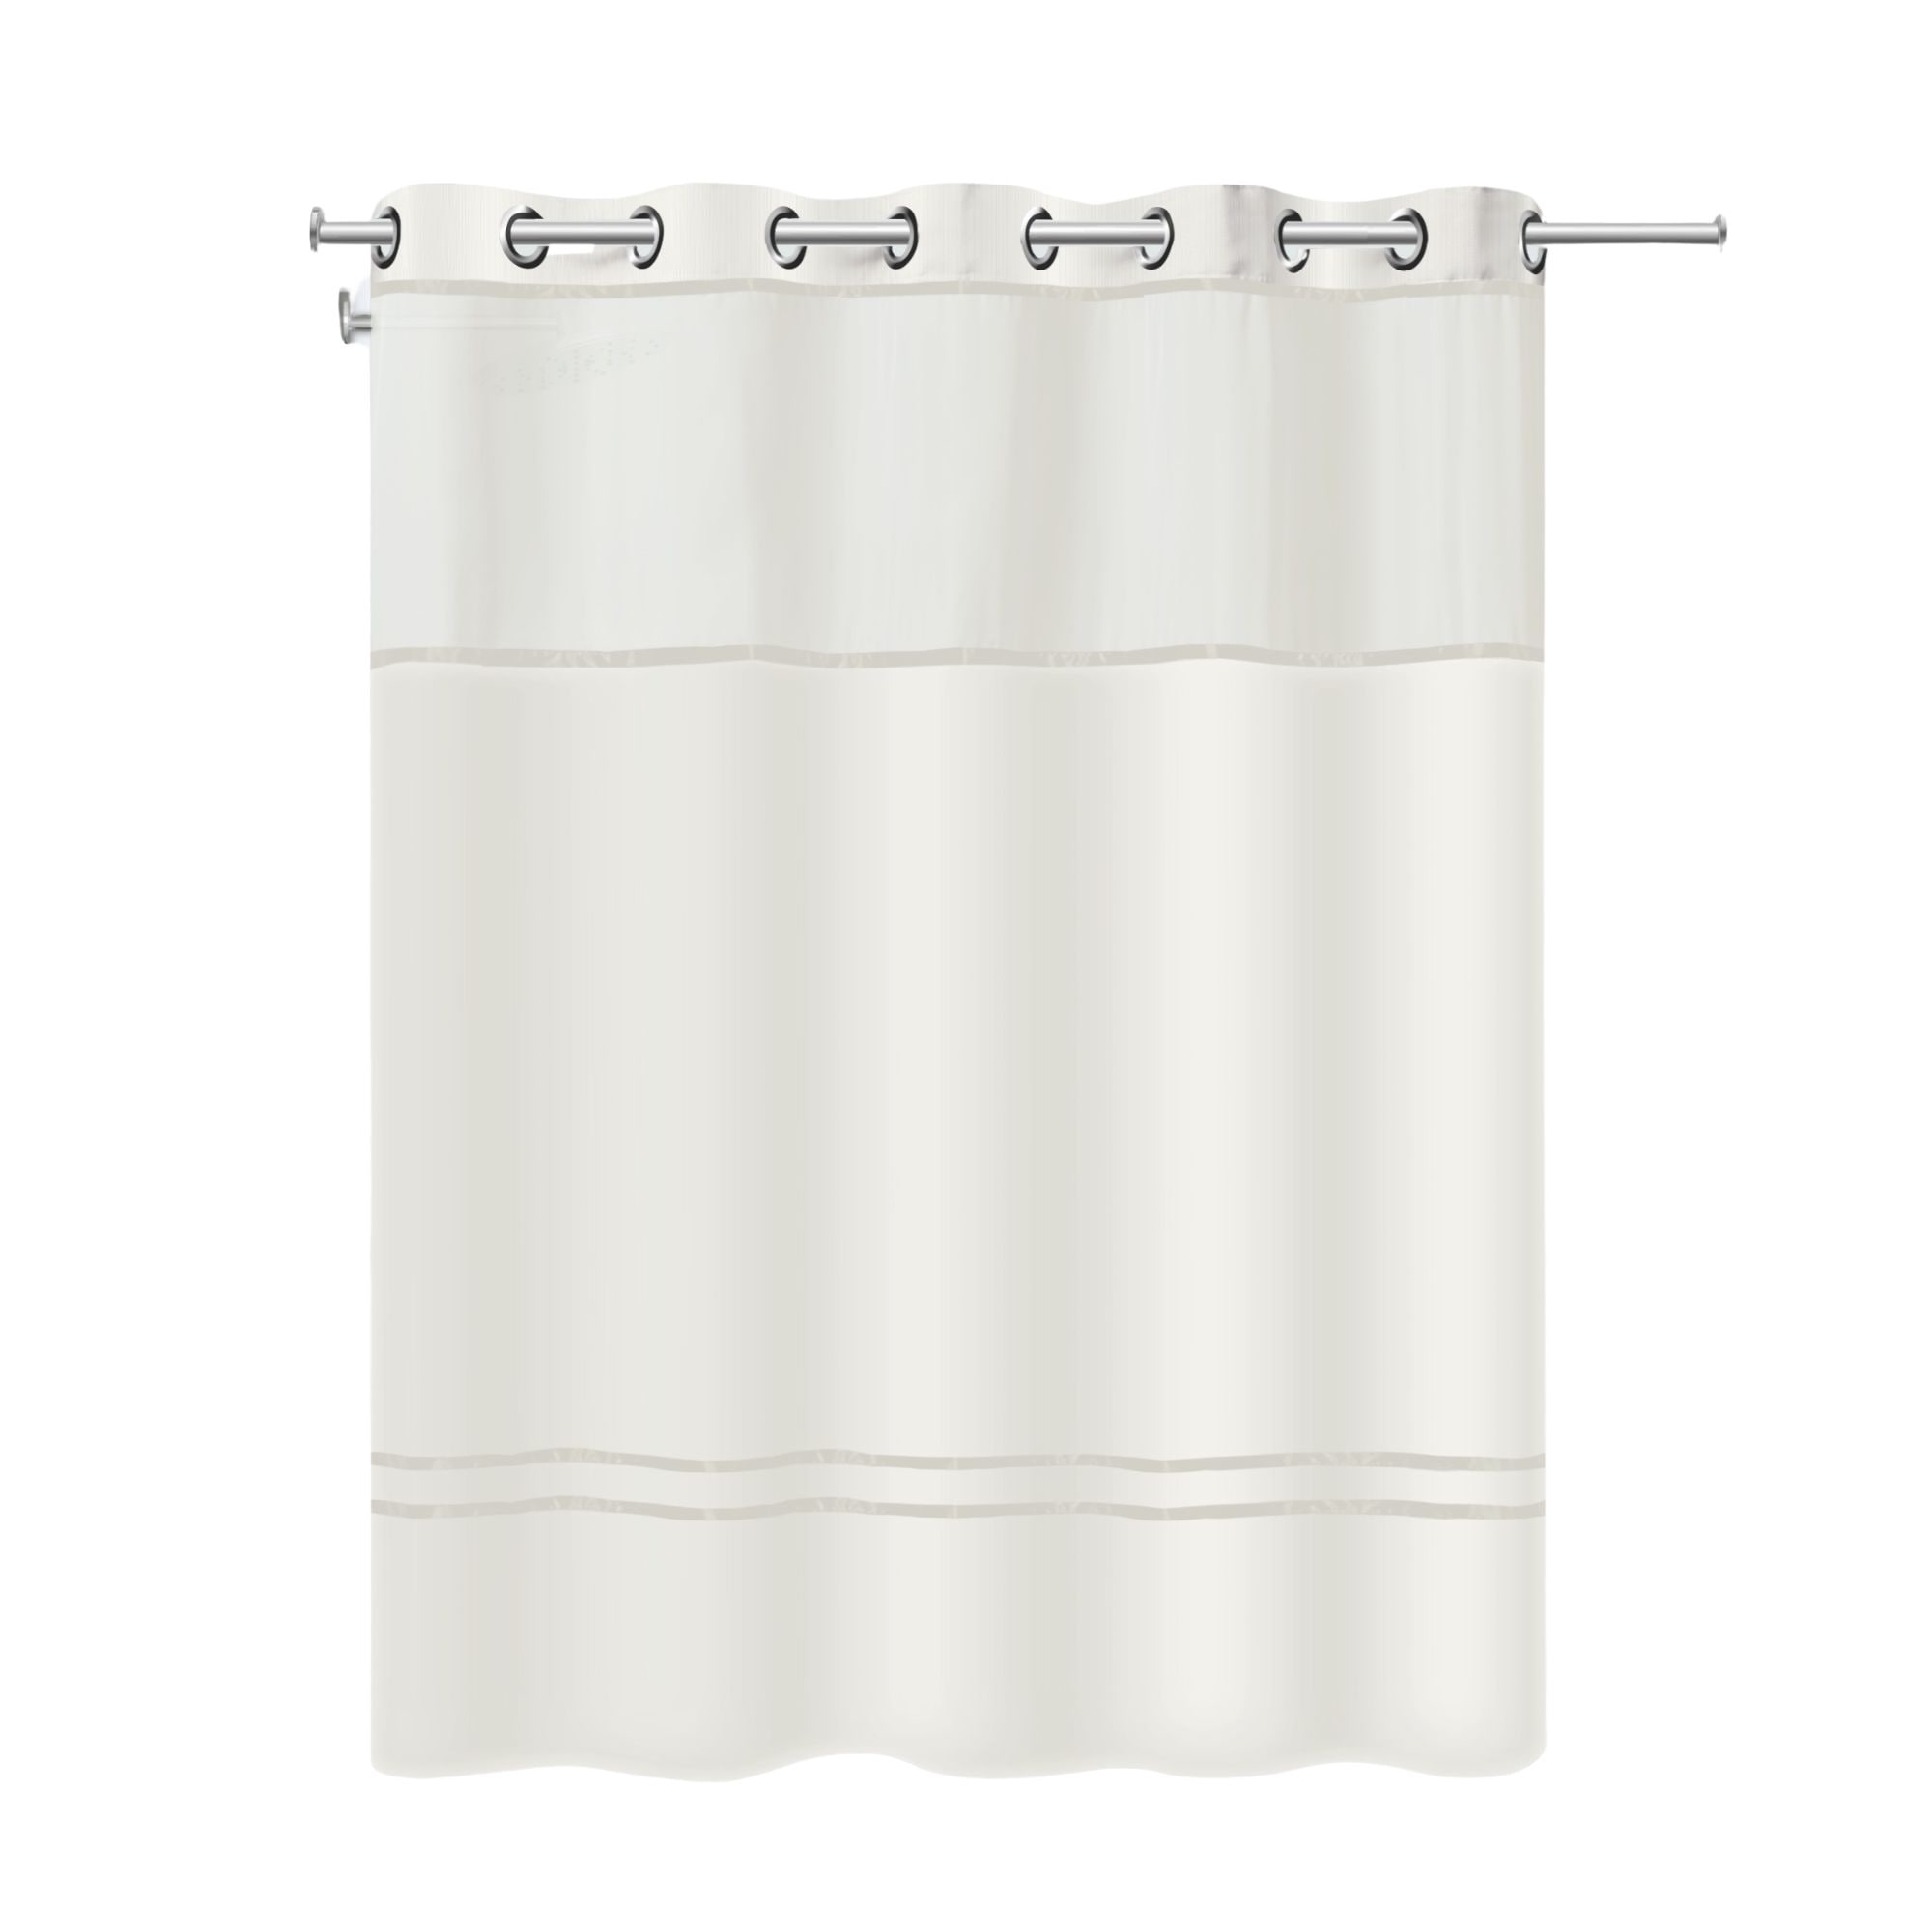 Hookless Escape 3-in-1 Shower Curtain with Sheer Top Window, Flex